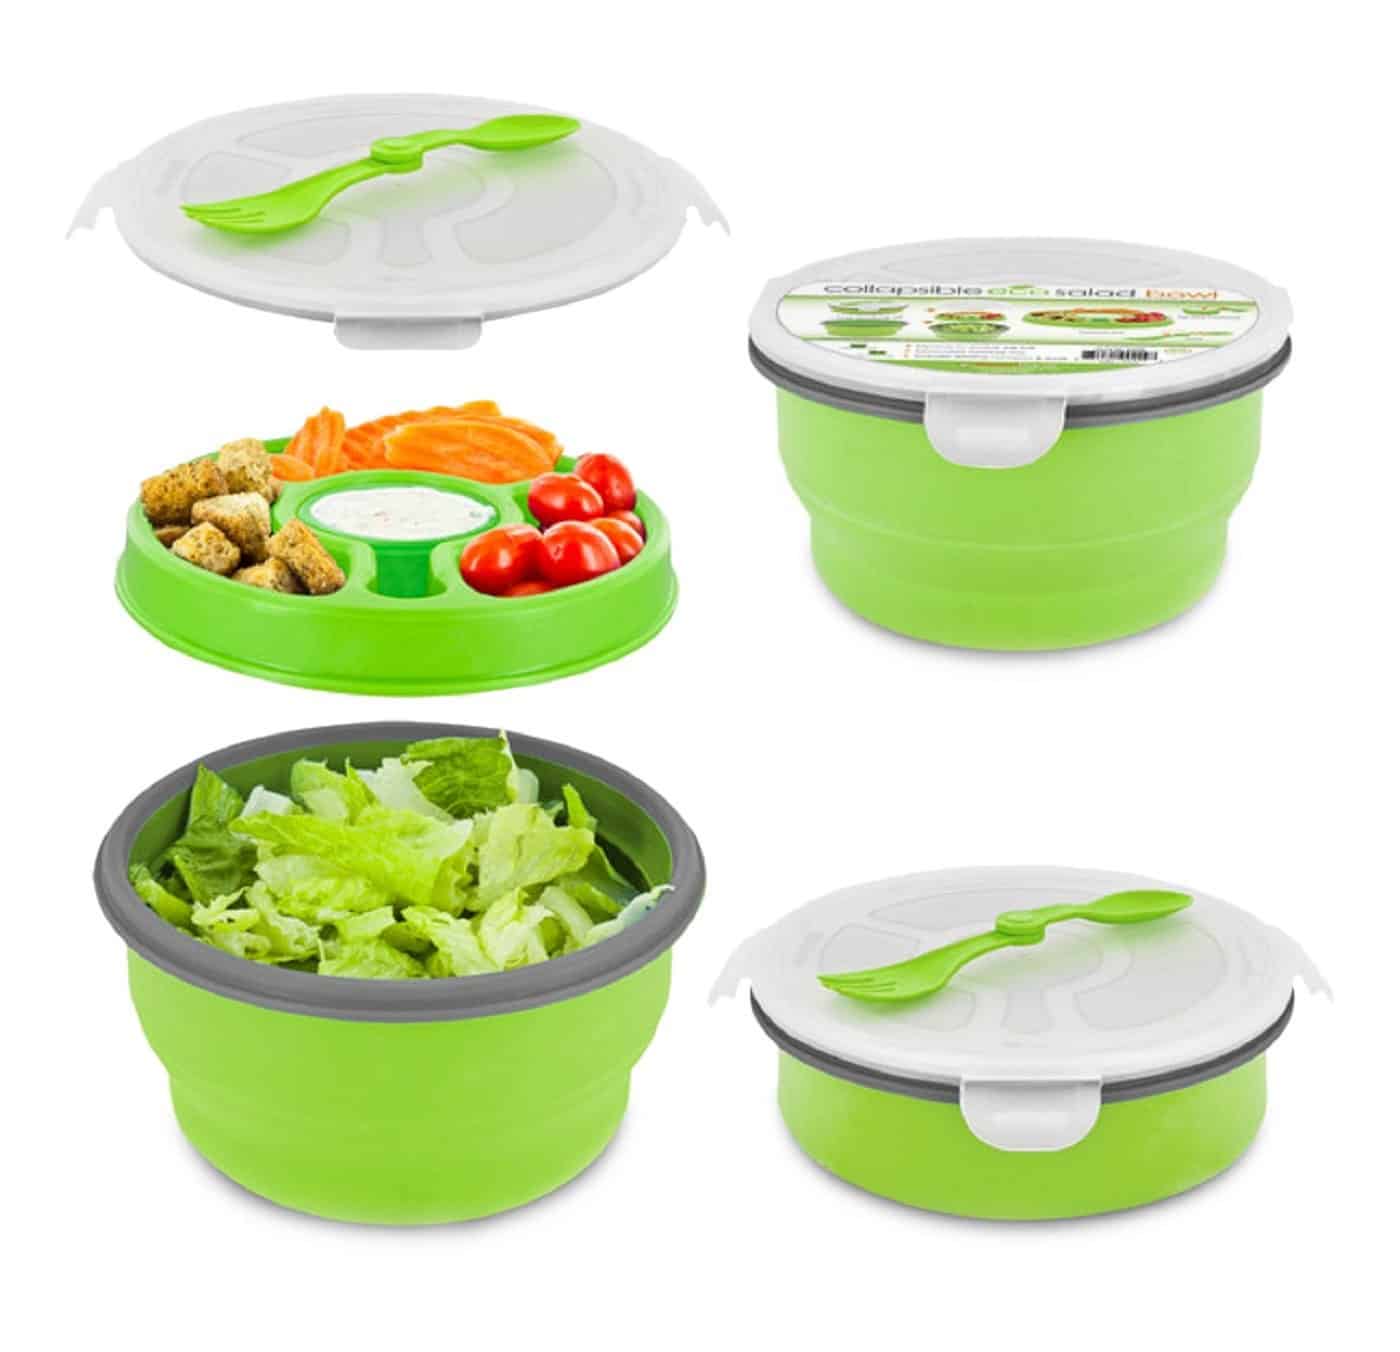 The Best Salad Container for WorkOr Picnics!